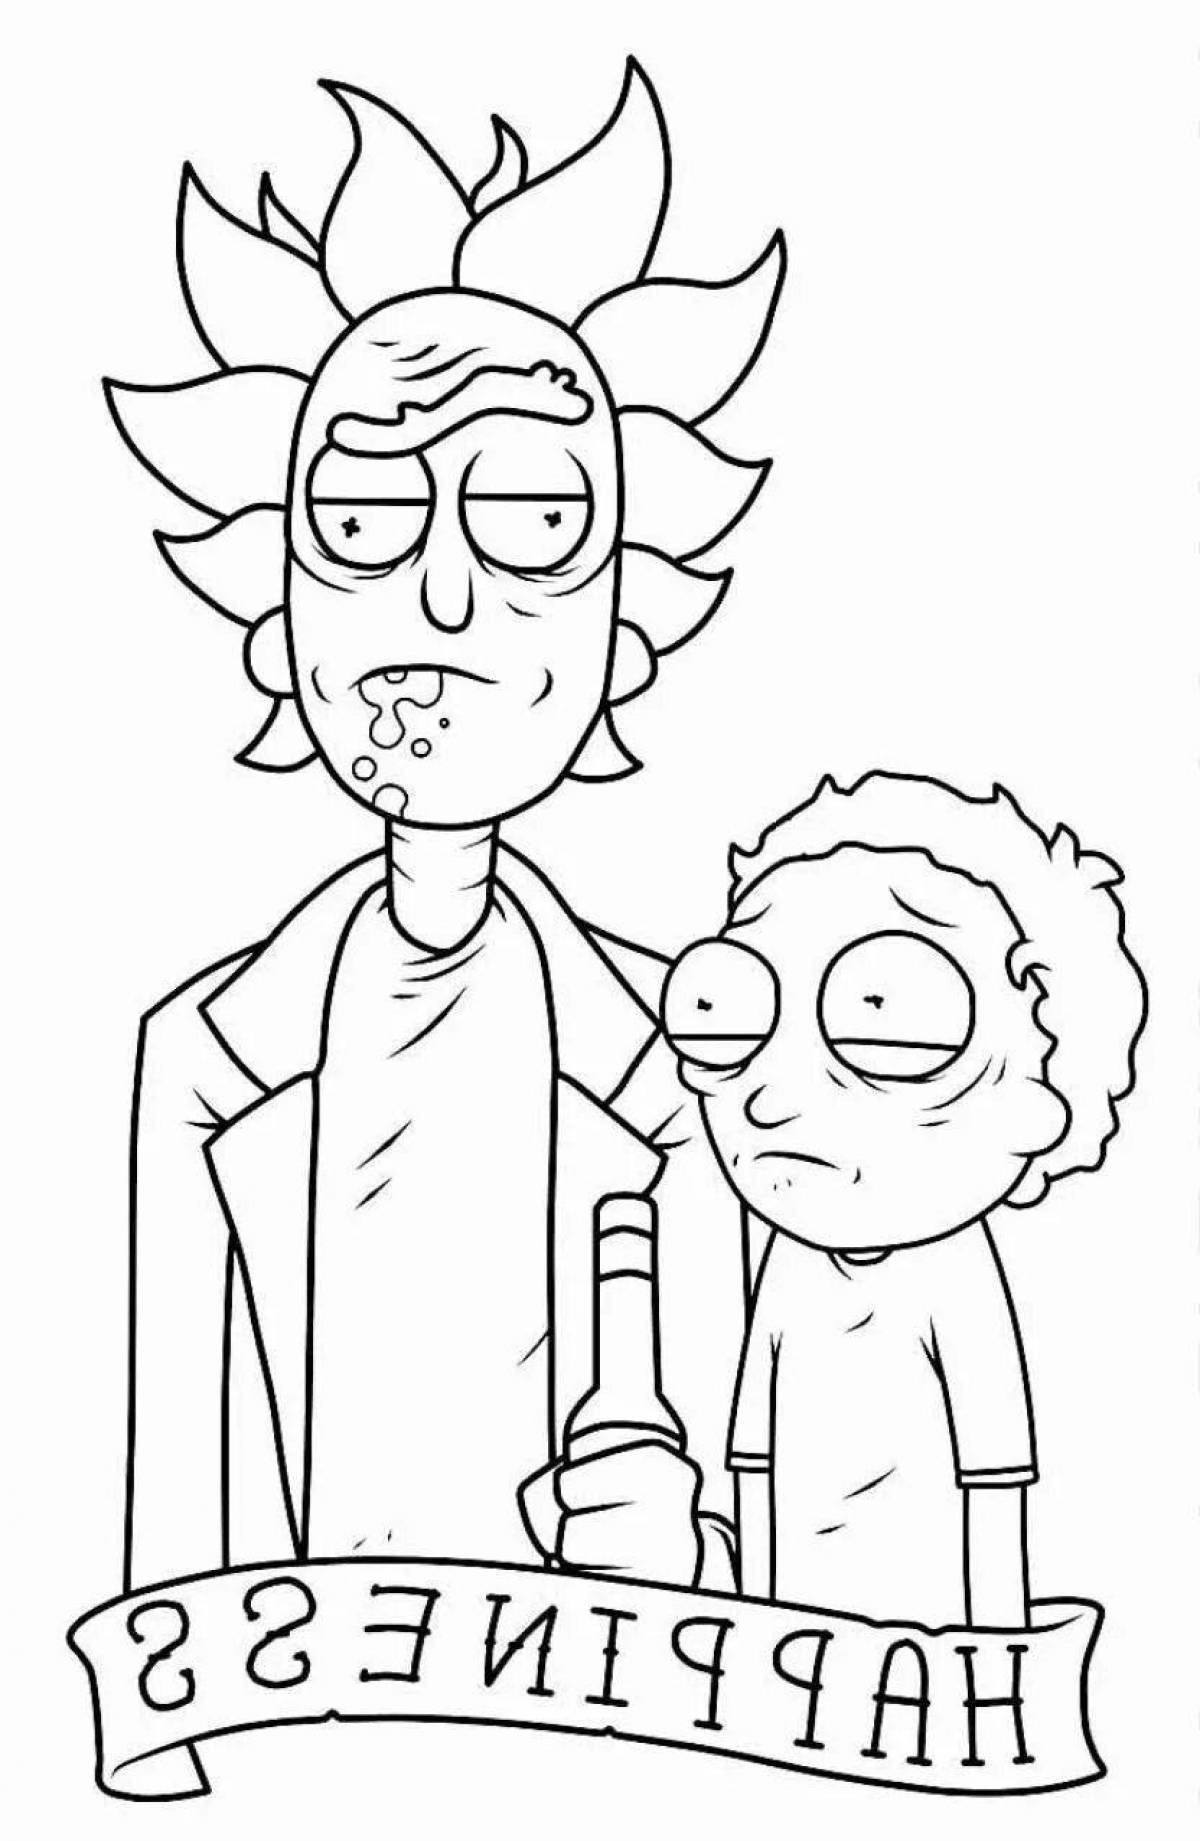 Snickering morty coloring book